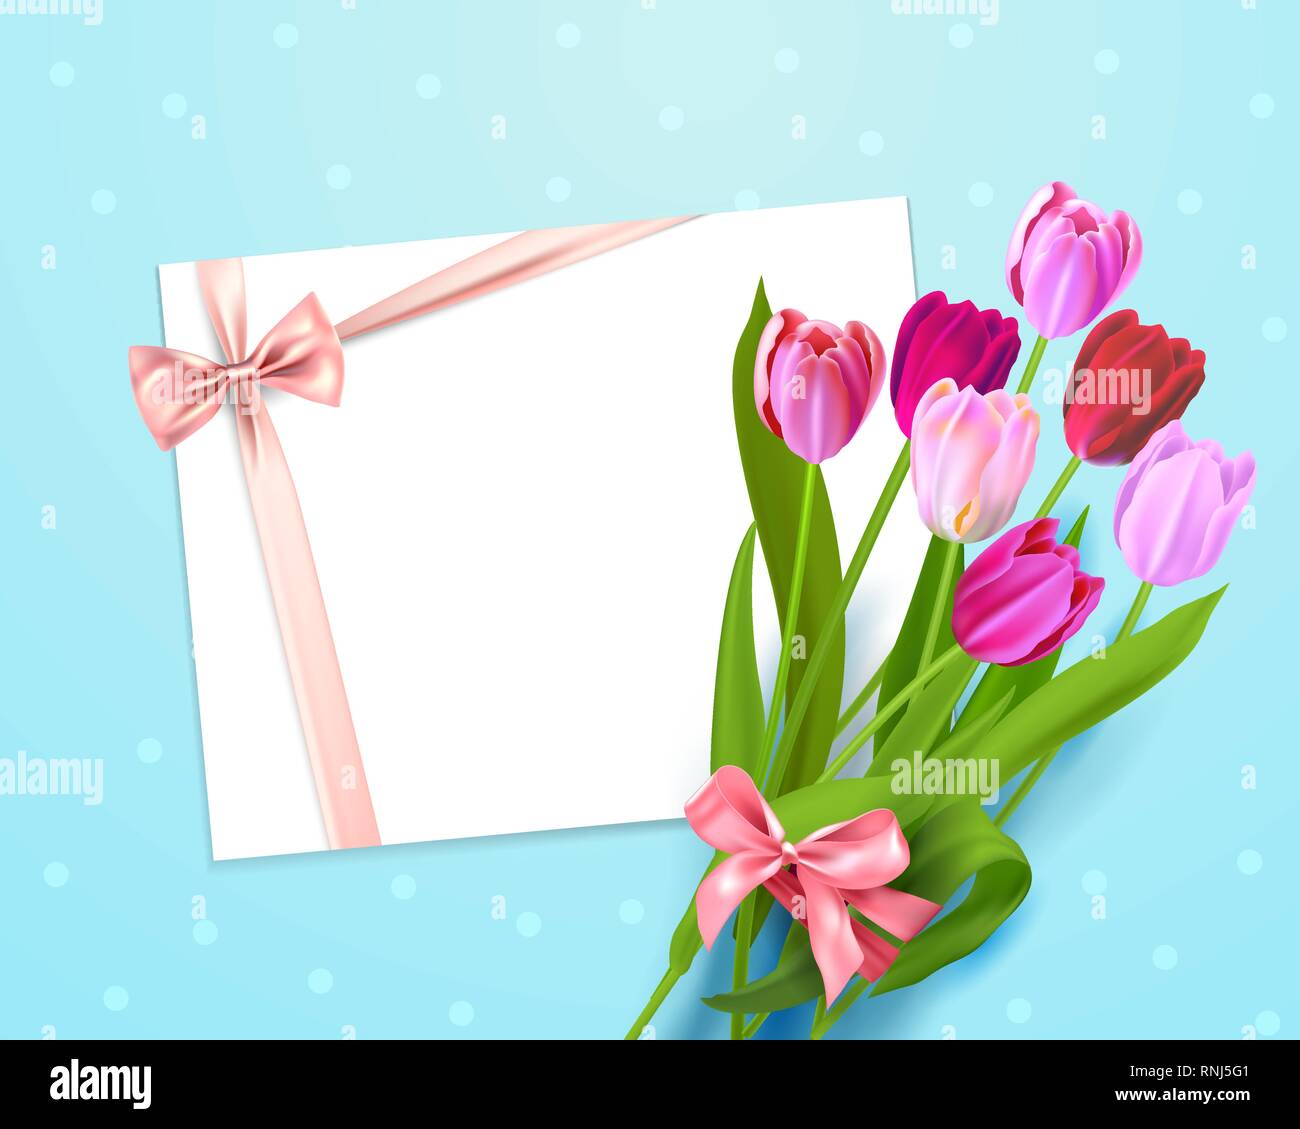 Realistic vector colorful tulips background. Spring flowers and holiday card with place for text. Stock Vector